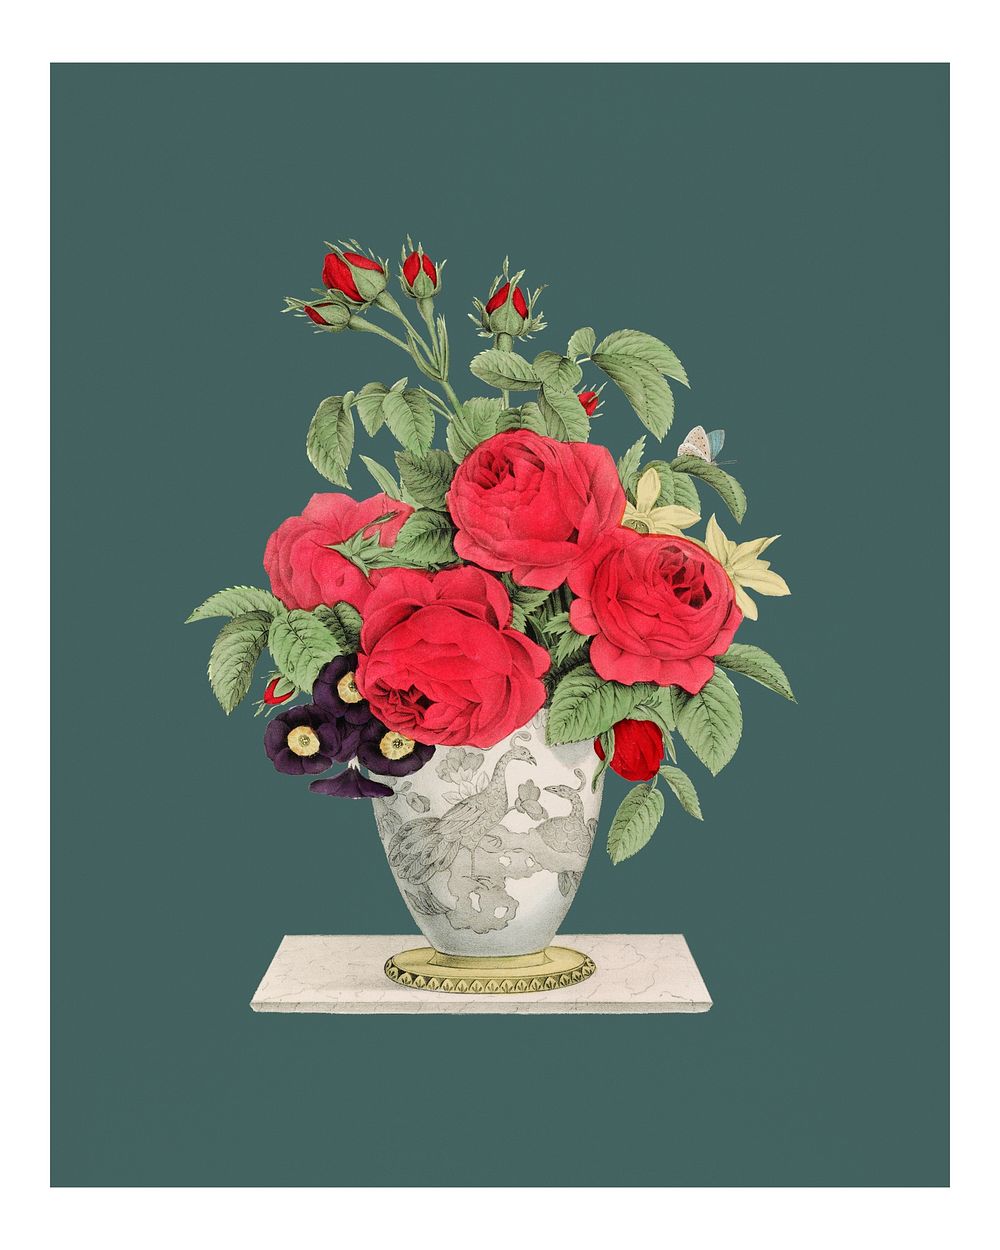 Vintage bouquet illustration wall art print and poster.